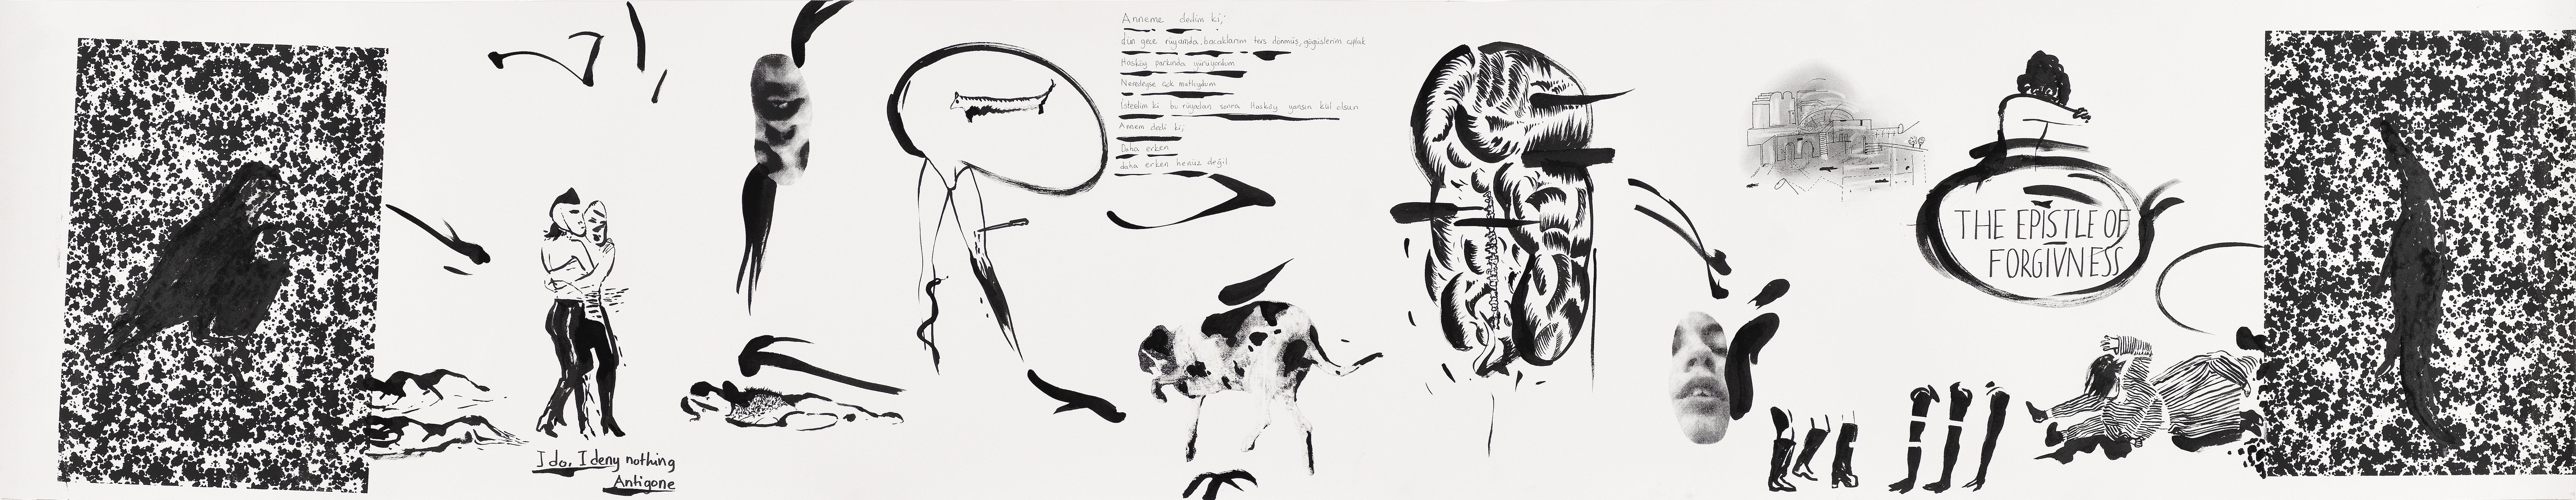 The Epistle of Forgiveness / Affetmenin Risalesi, 2020,
Ink, charcoal pen and screen print on paper
46.5 x 237 x 3 cm